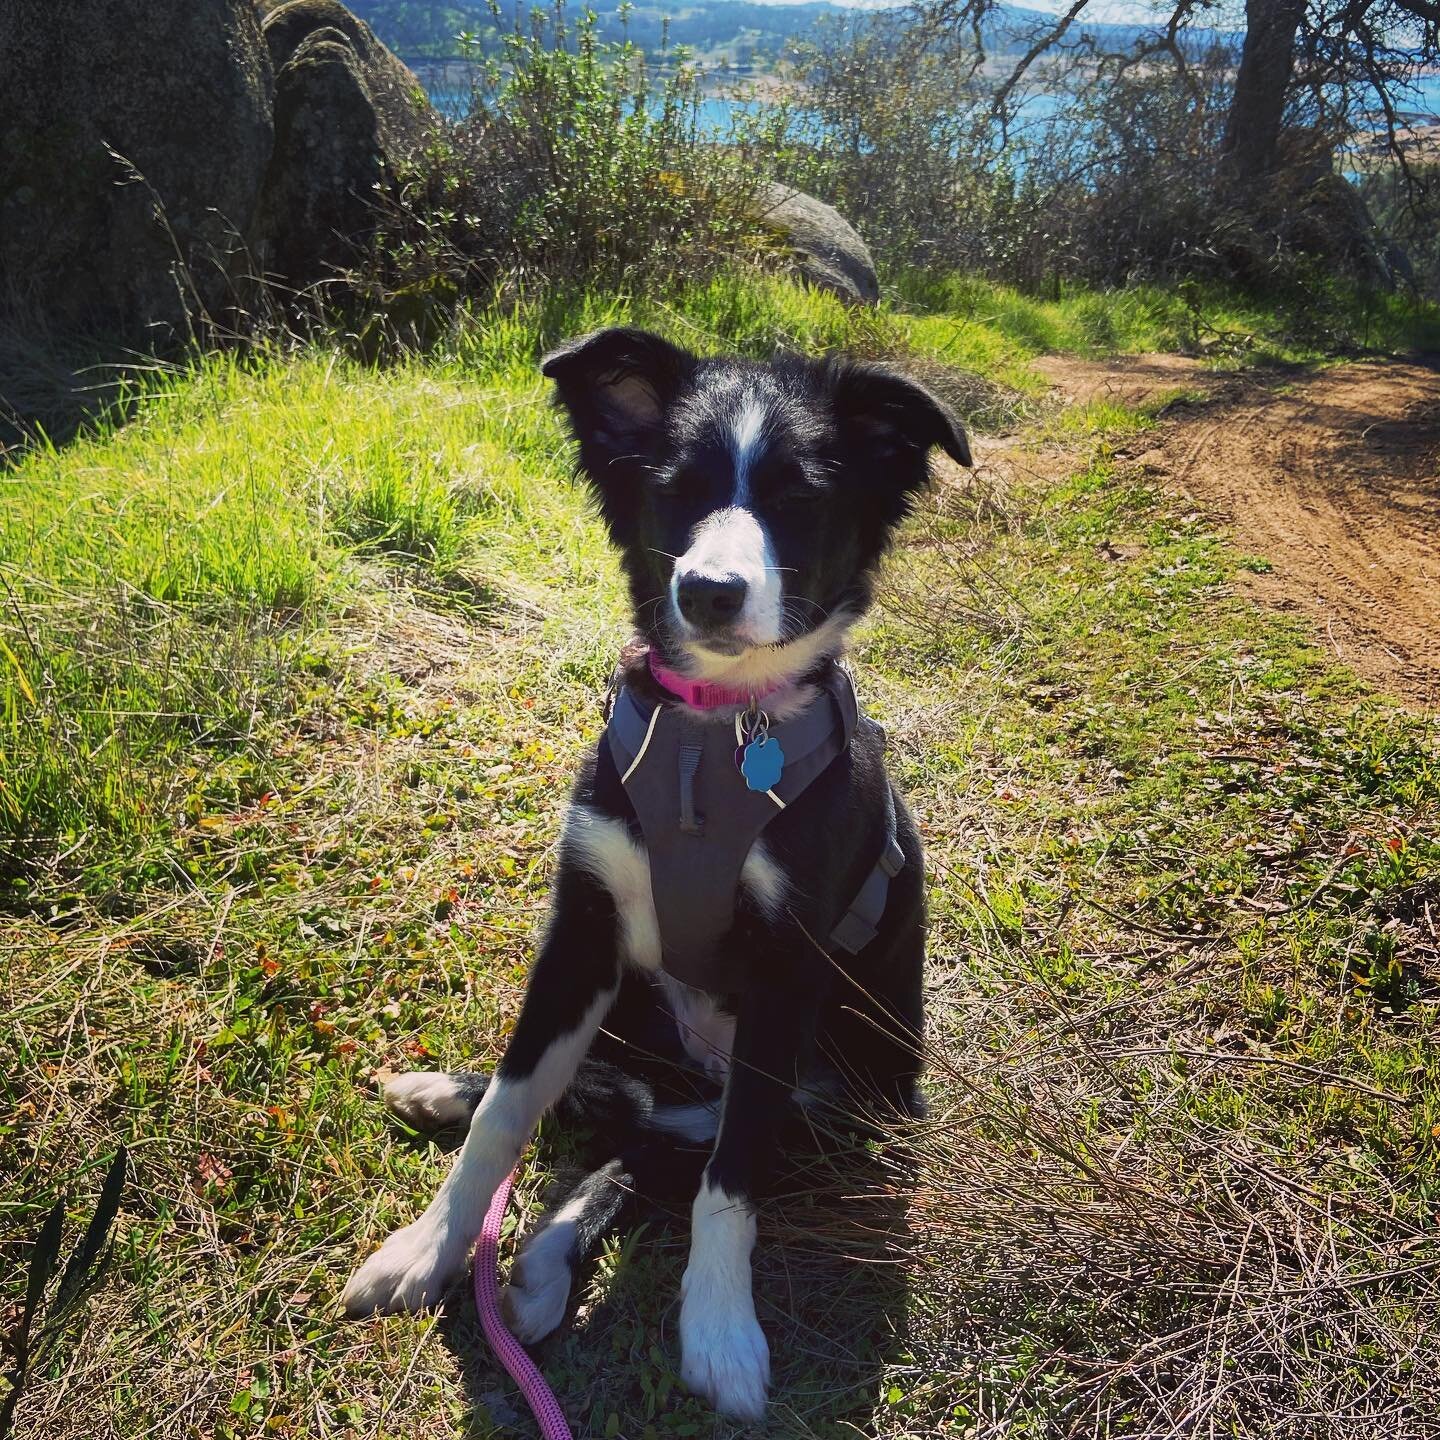 Our puppy Cali, the adventure girl, is loving her trail training, now we just have to teach her to stop being afraid of bikes!😱#mtbdog #traildog #bordercollie #mtbgirl